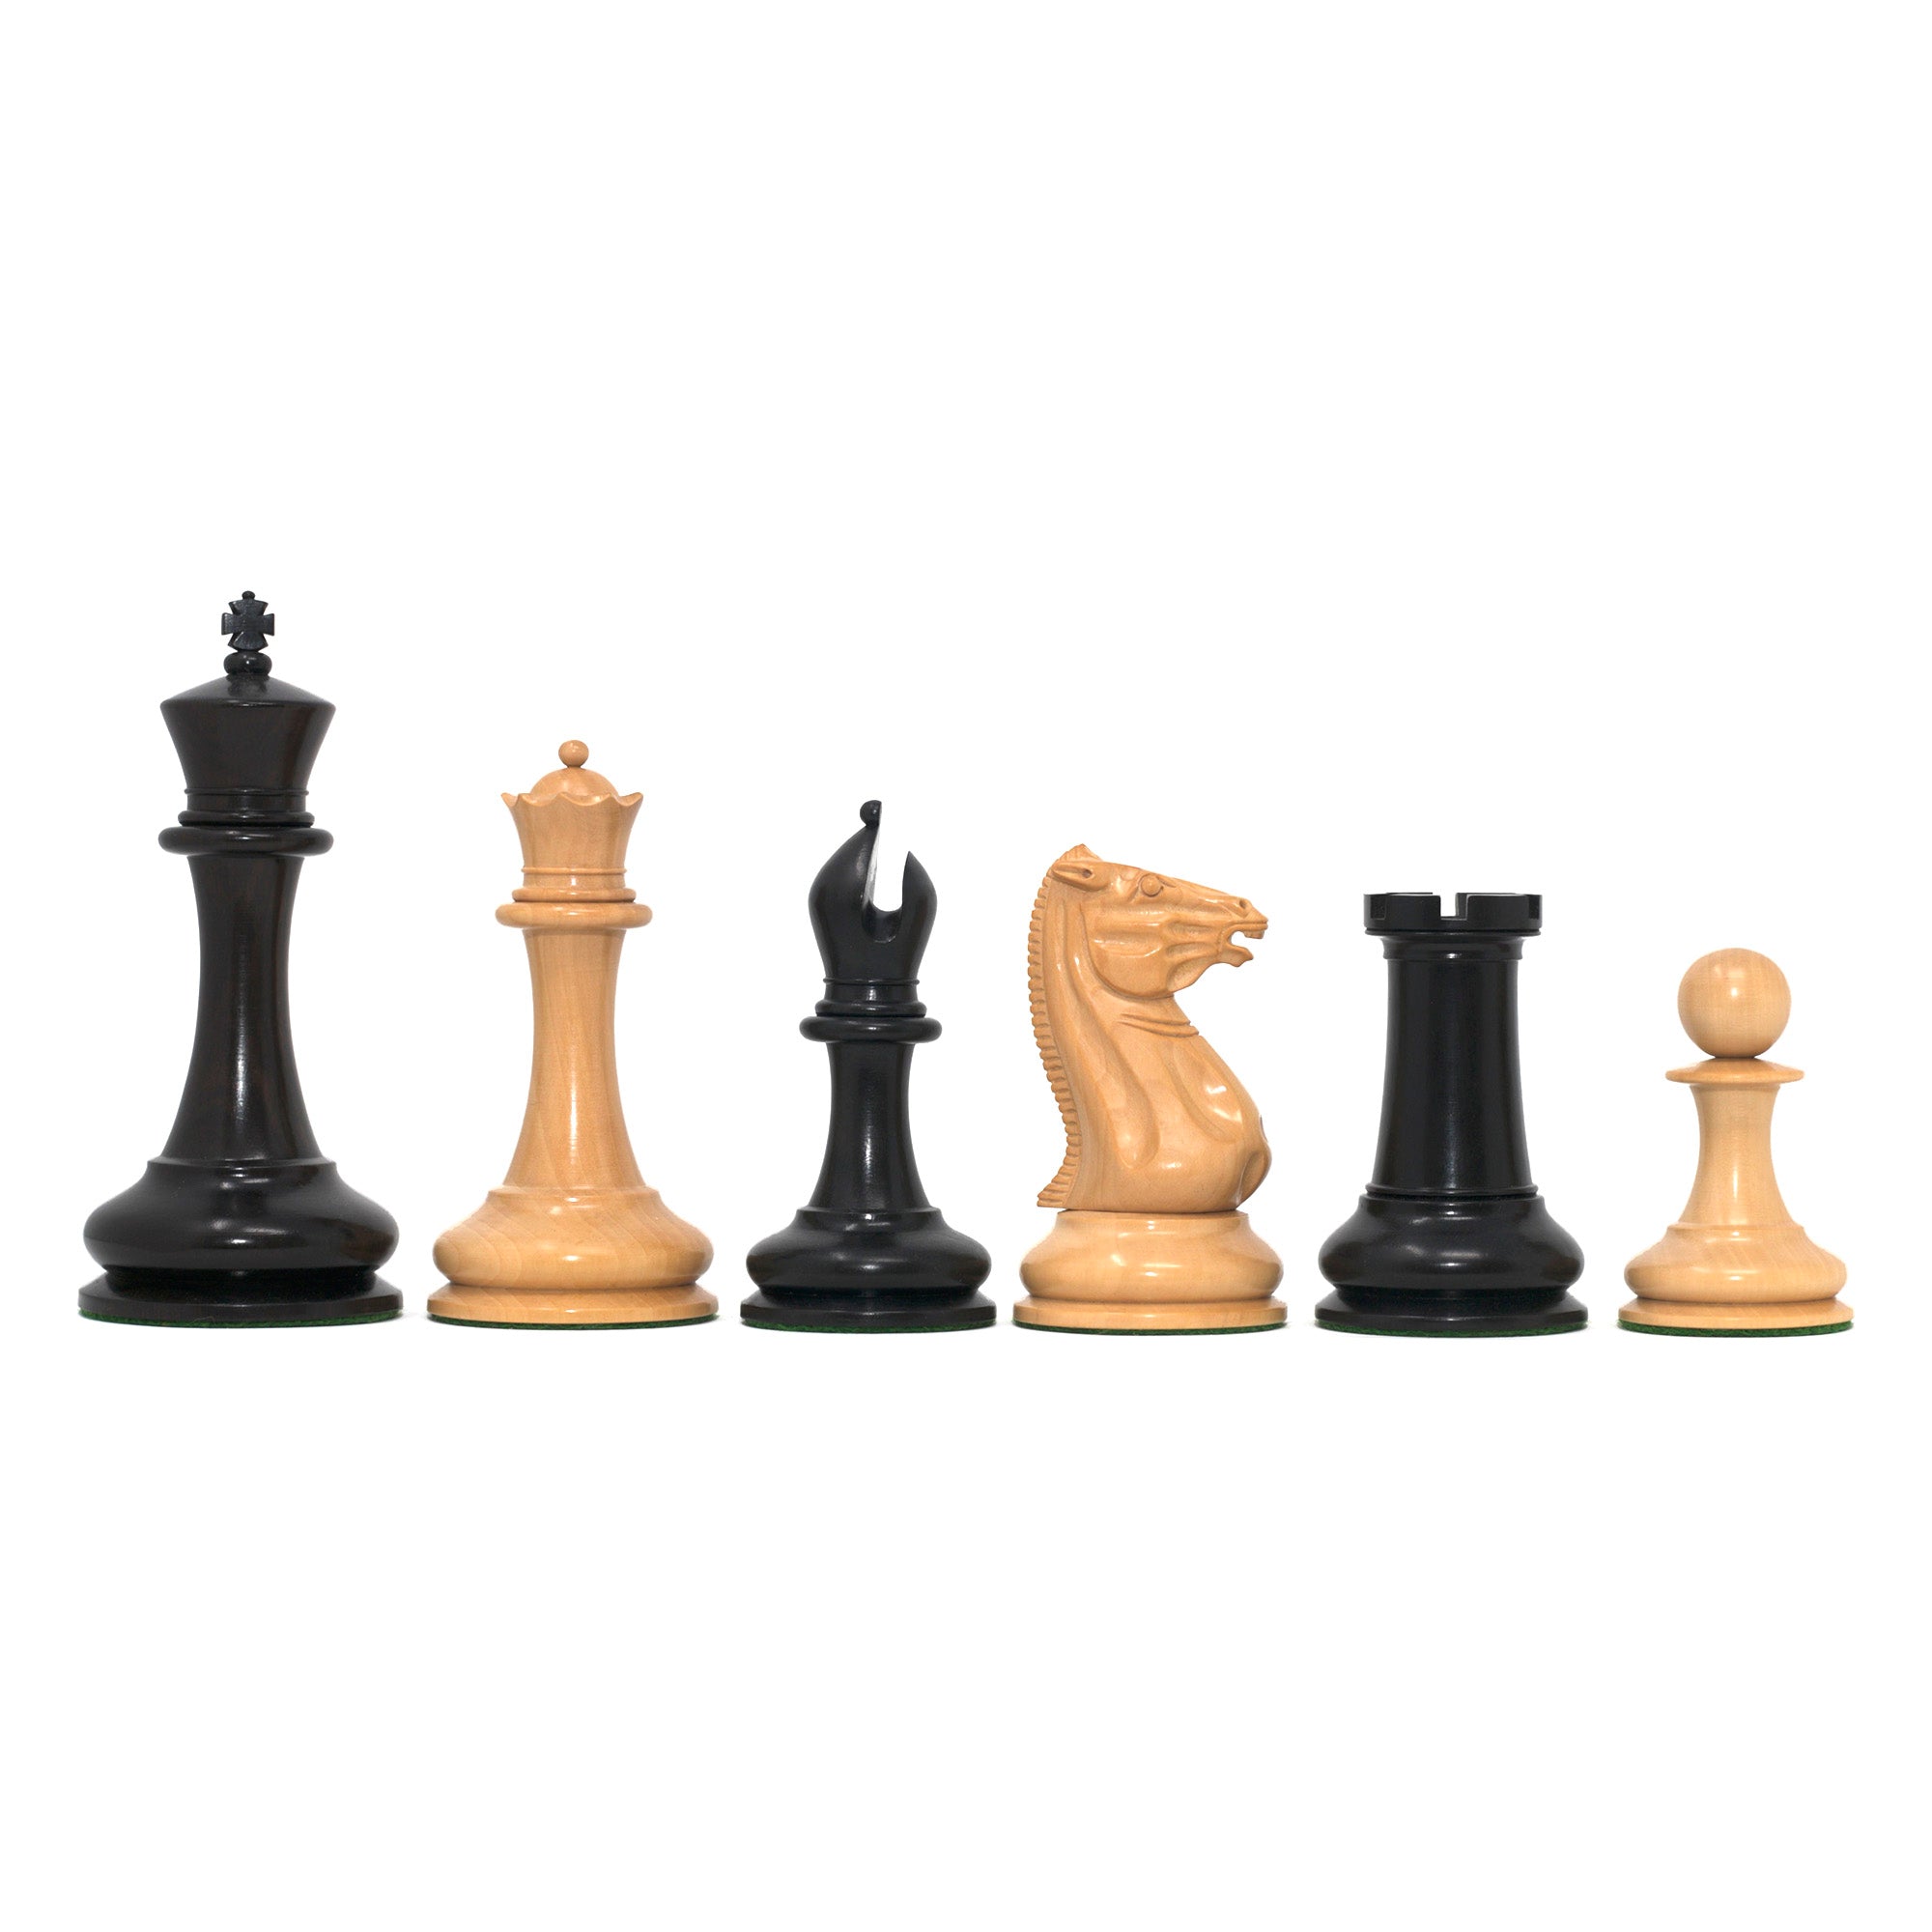 Morphy Cooke 1849-50 Reproduced 4.4" Chessmen in Non-Antiqued Boxwood and Ebony Wood